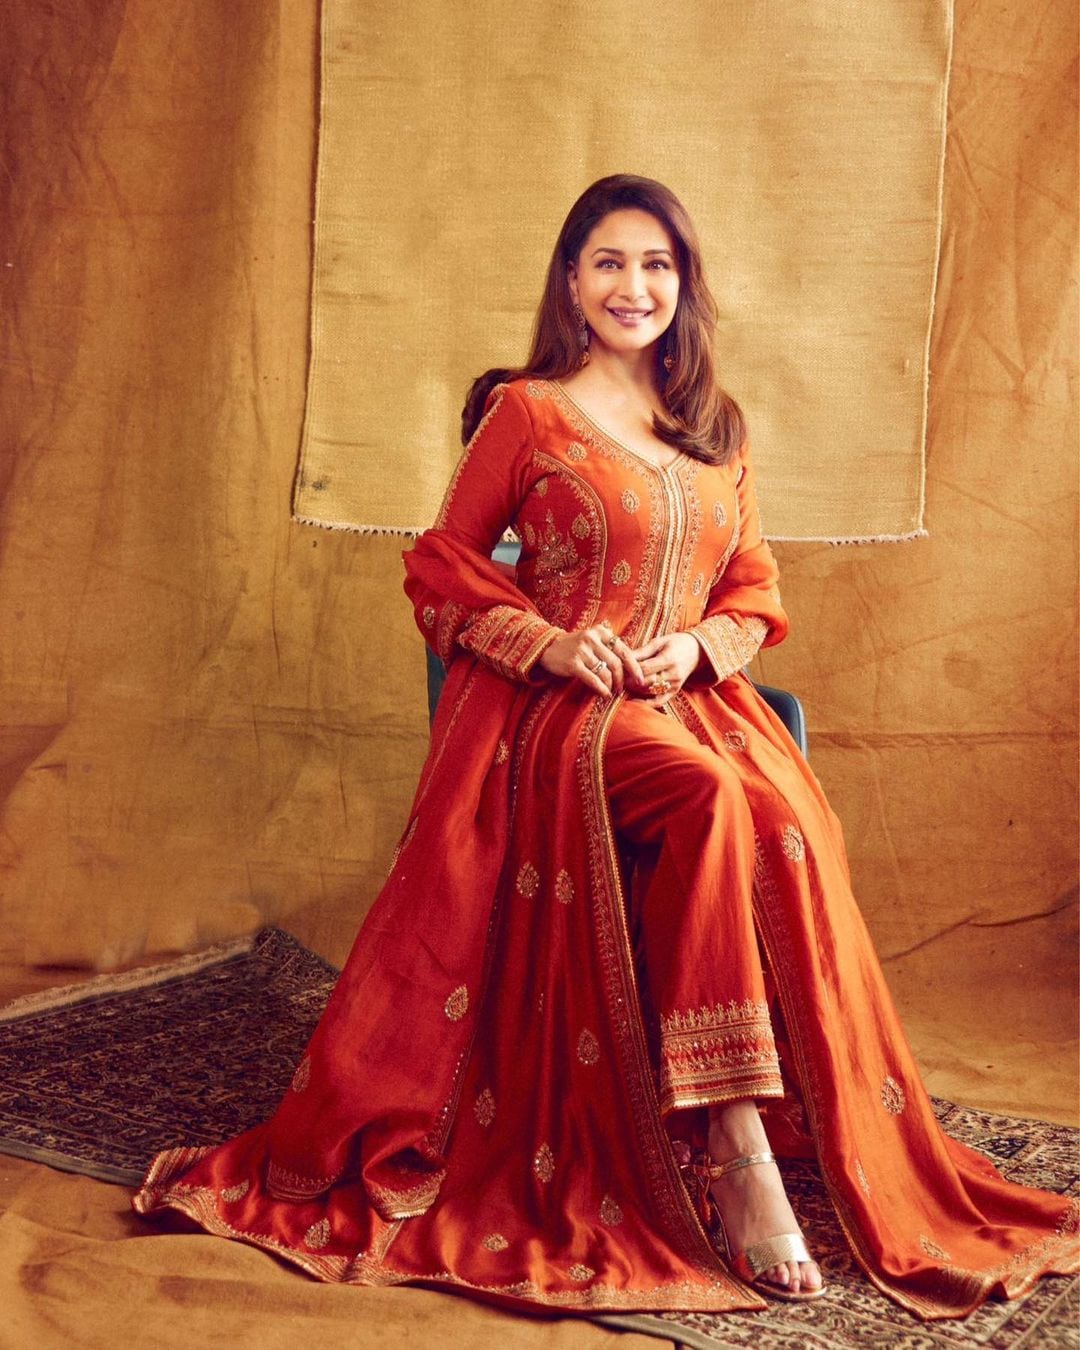 Add a pop of color to your festivities with Jigar Mali's Burnt Orange Chanderi Jacket Set.